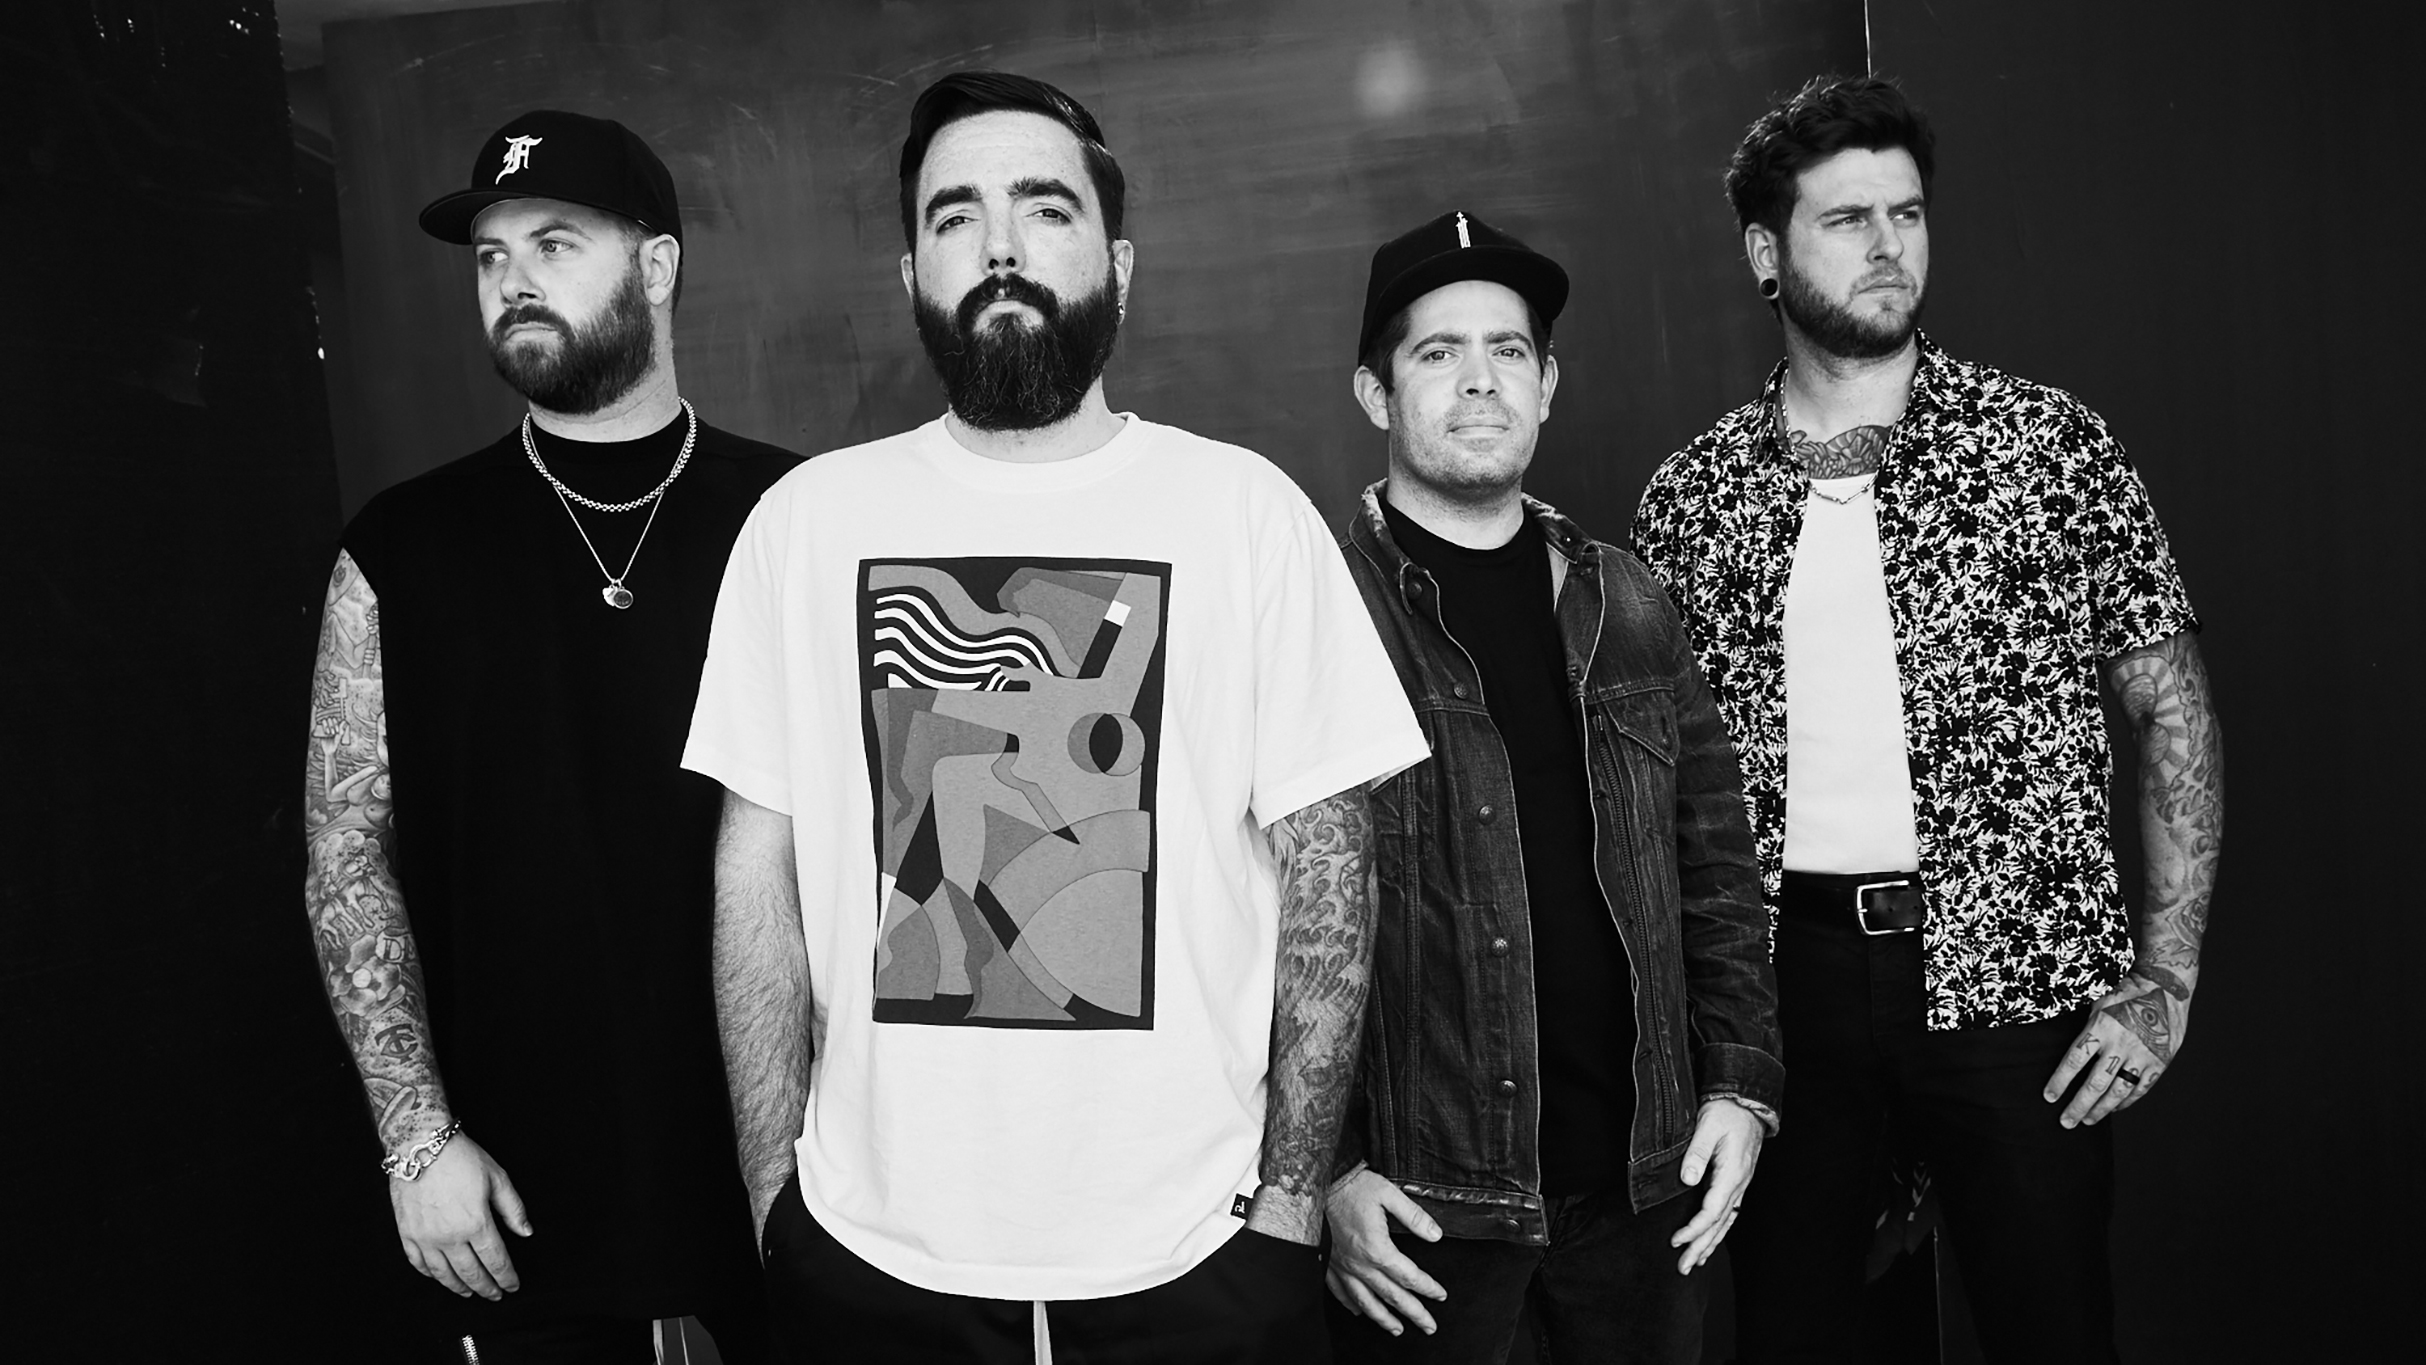 A Day To Remember - The Least Anticipated Album Tour: 105.7 The Point